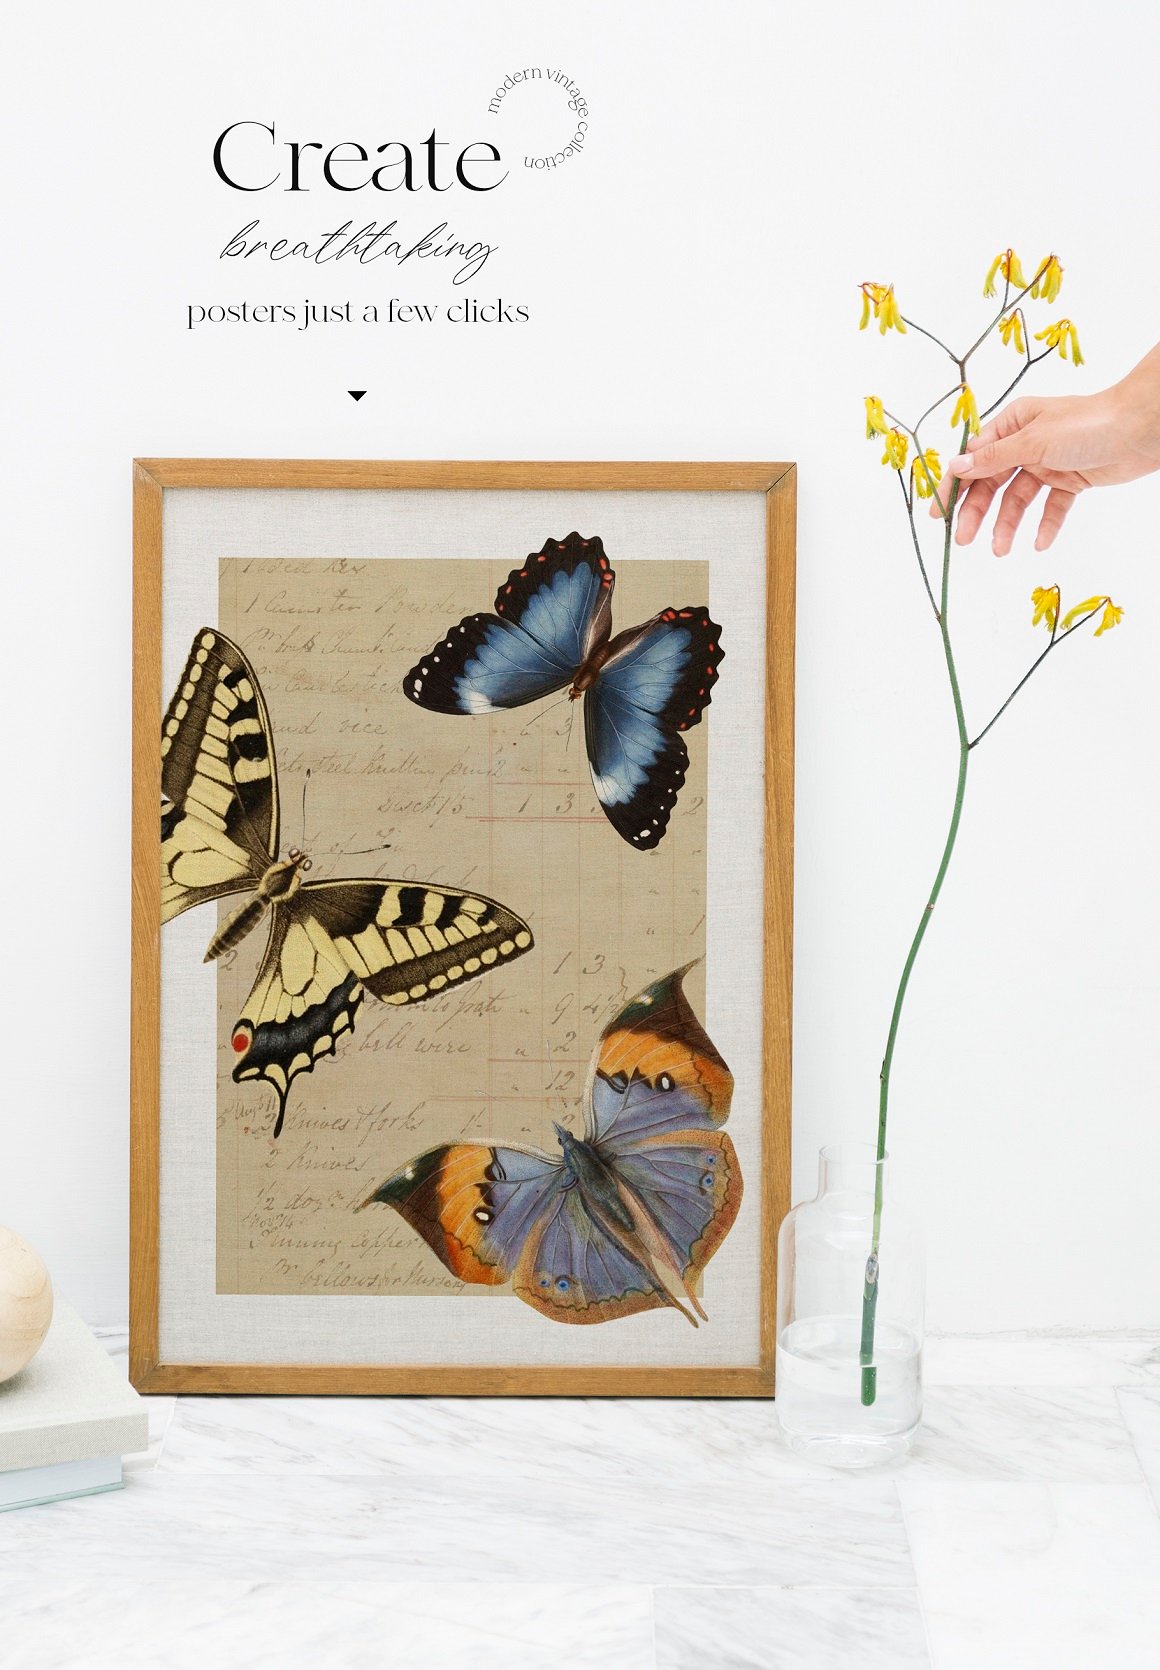 Vintage Butterfly Modern Collection